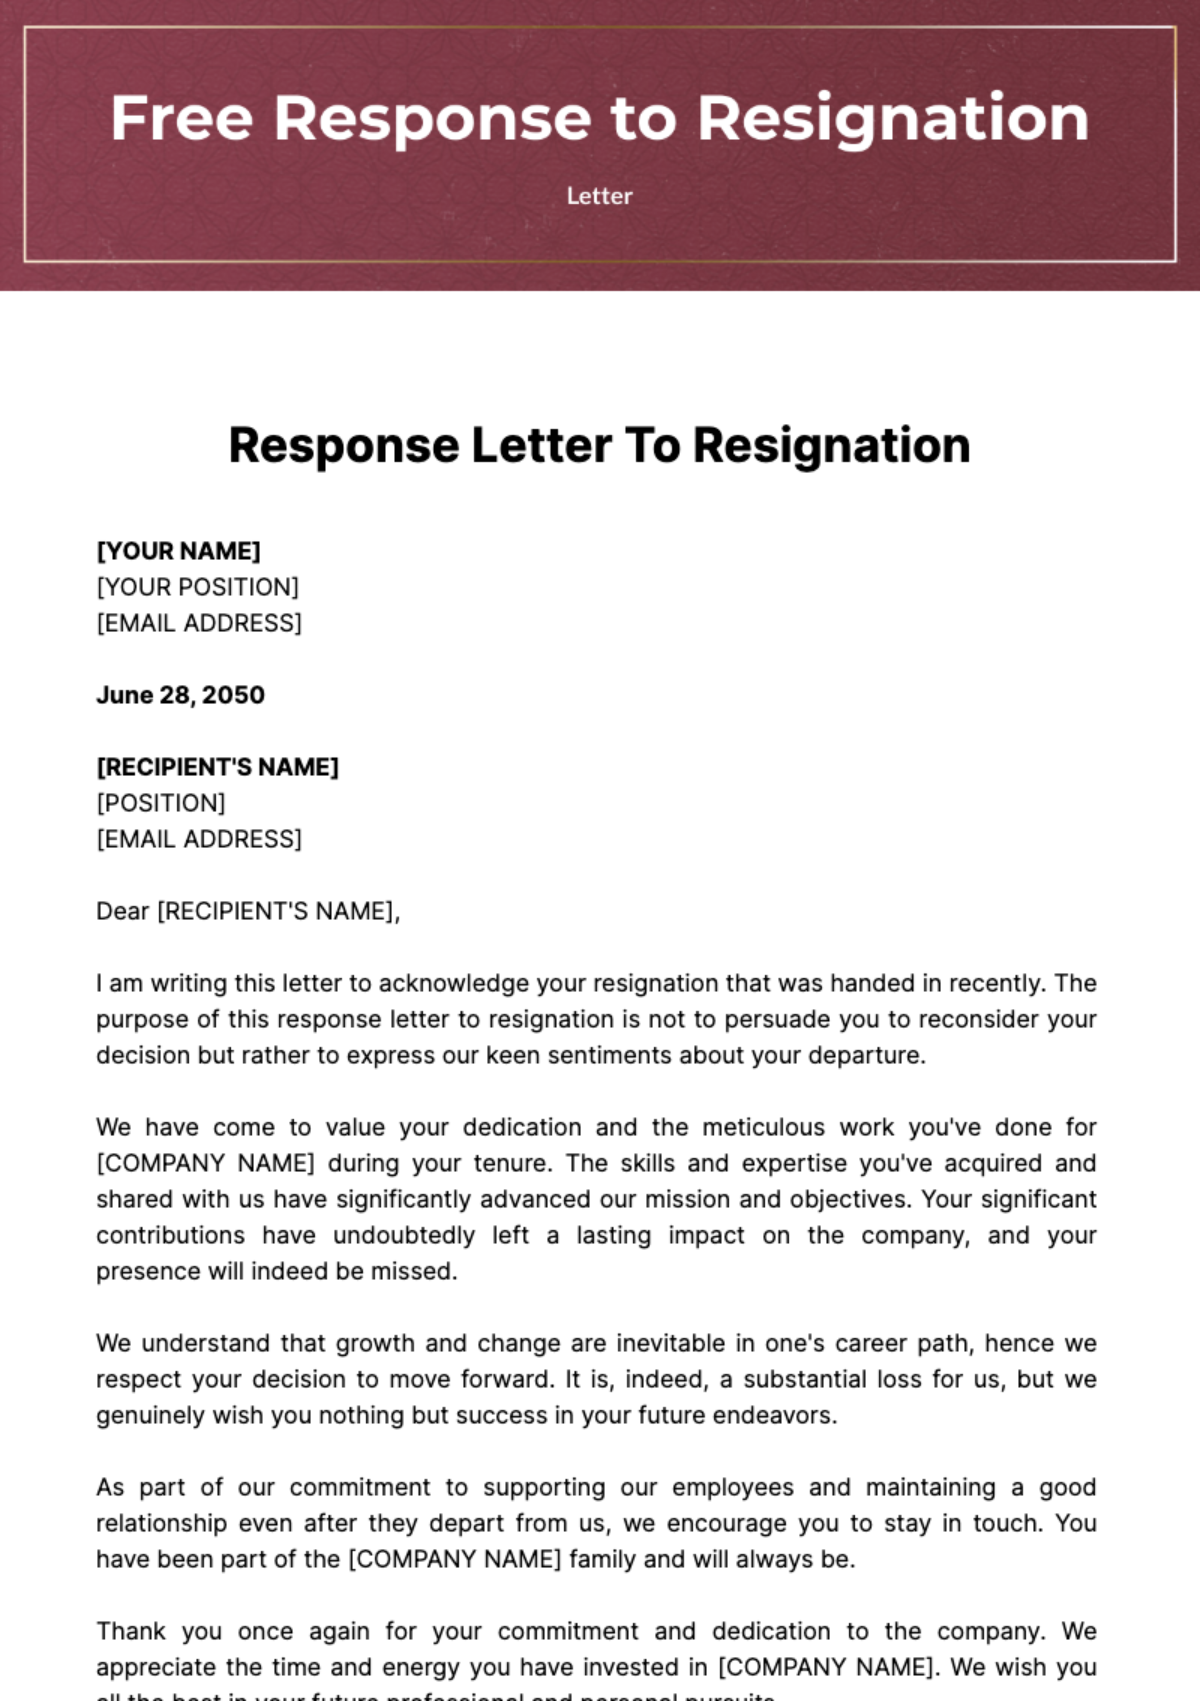 Response Letter to Resignation Template